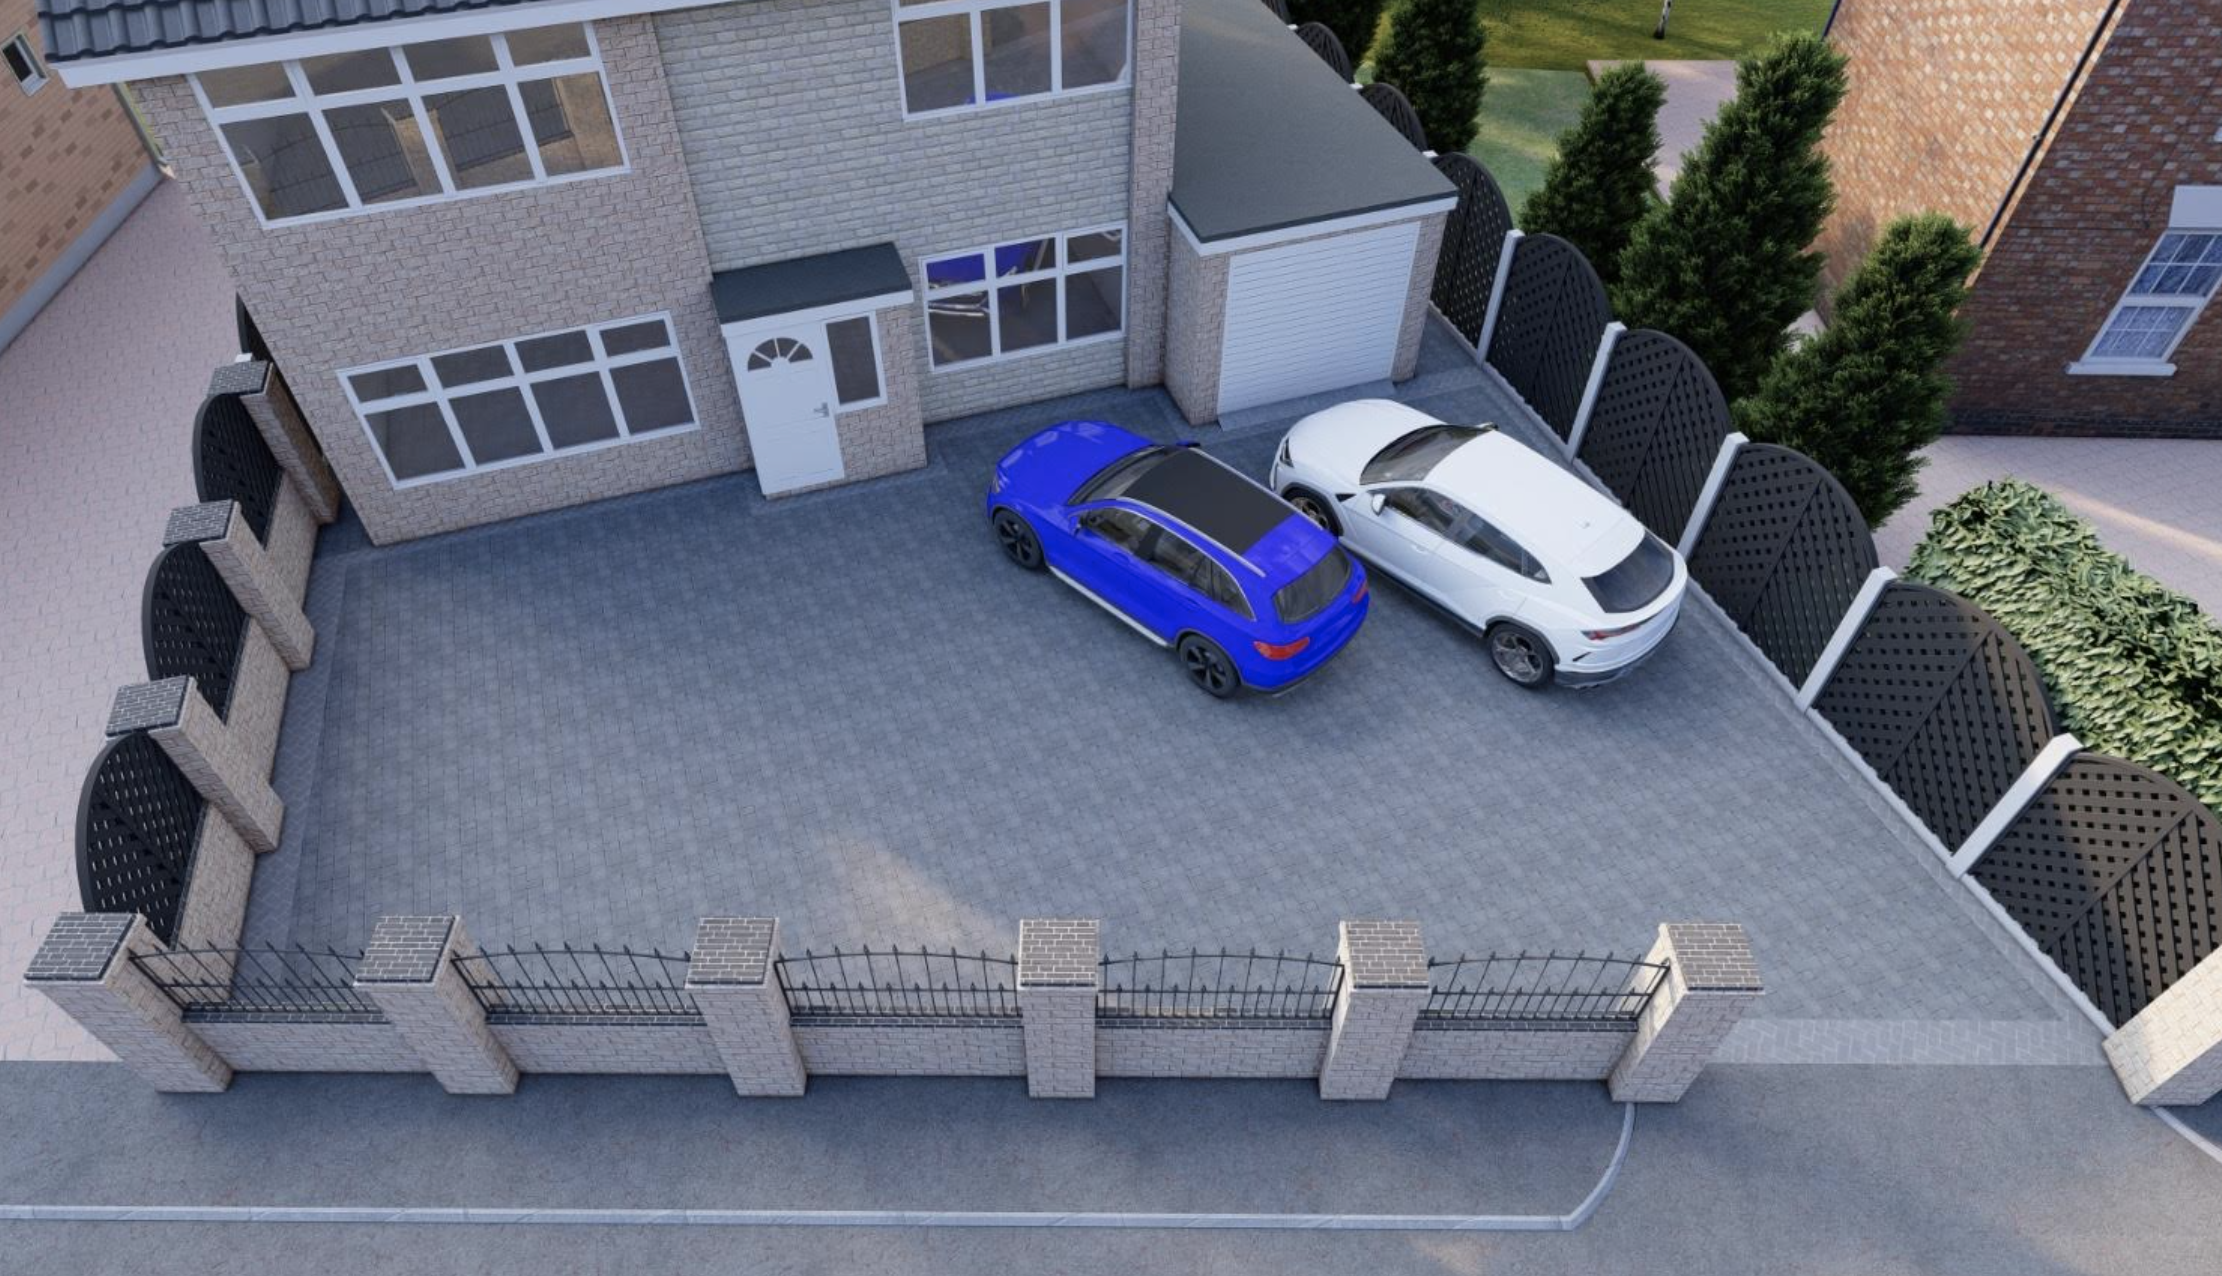 3D Render of the block paved front garden for my house